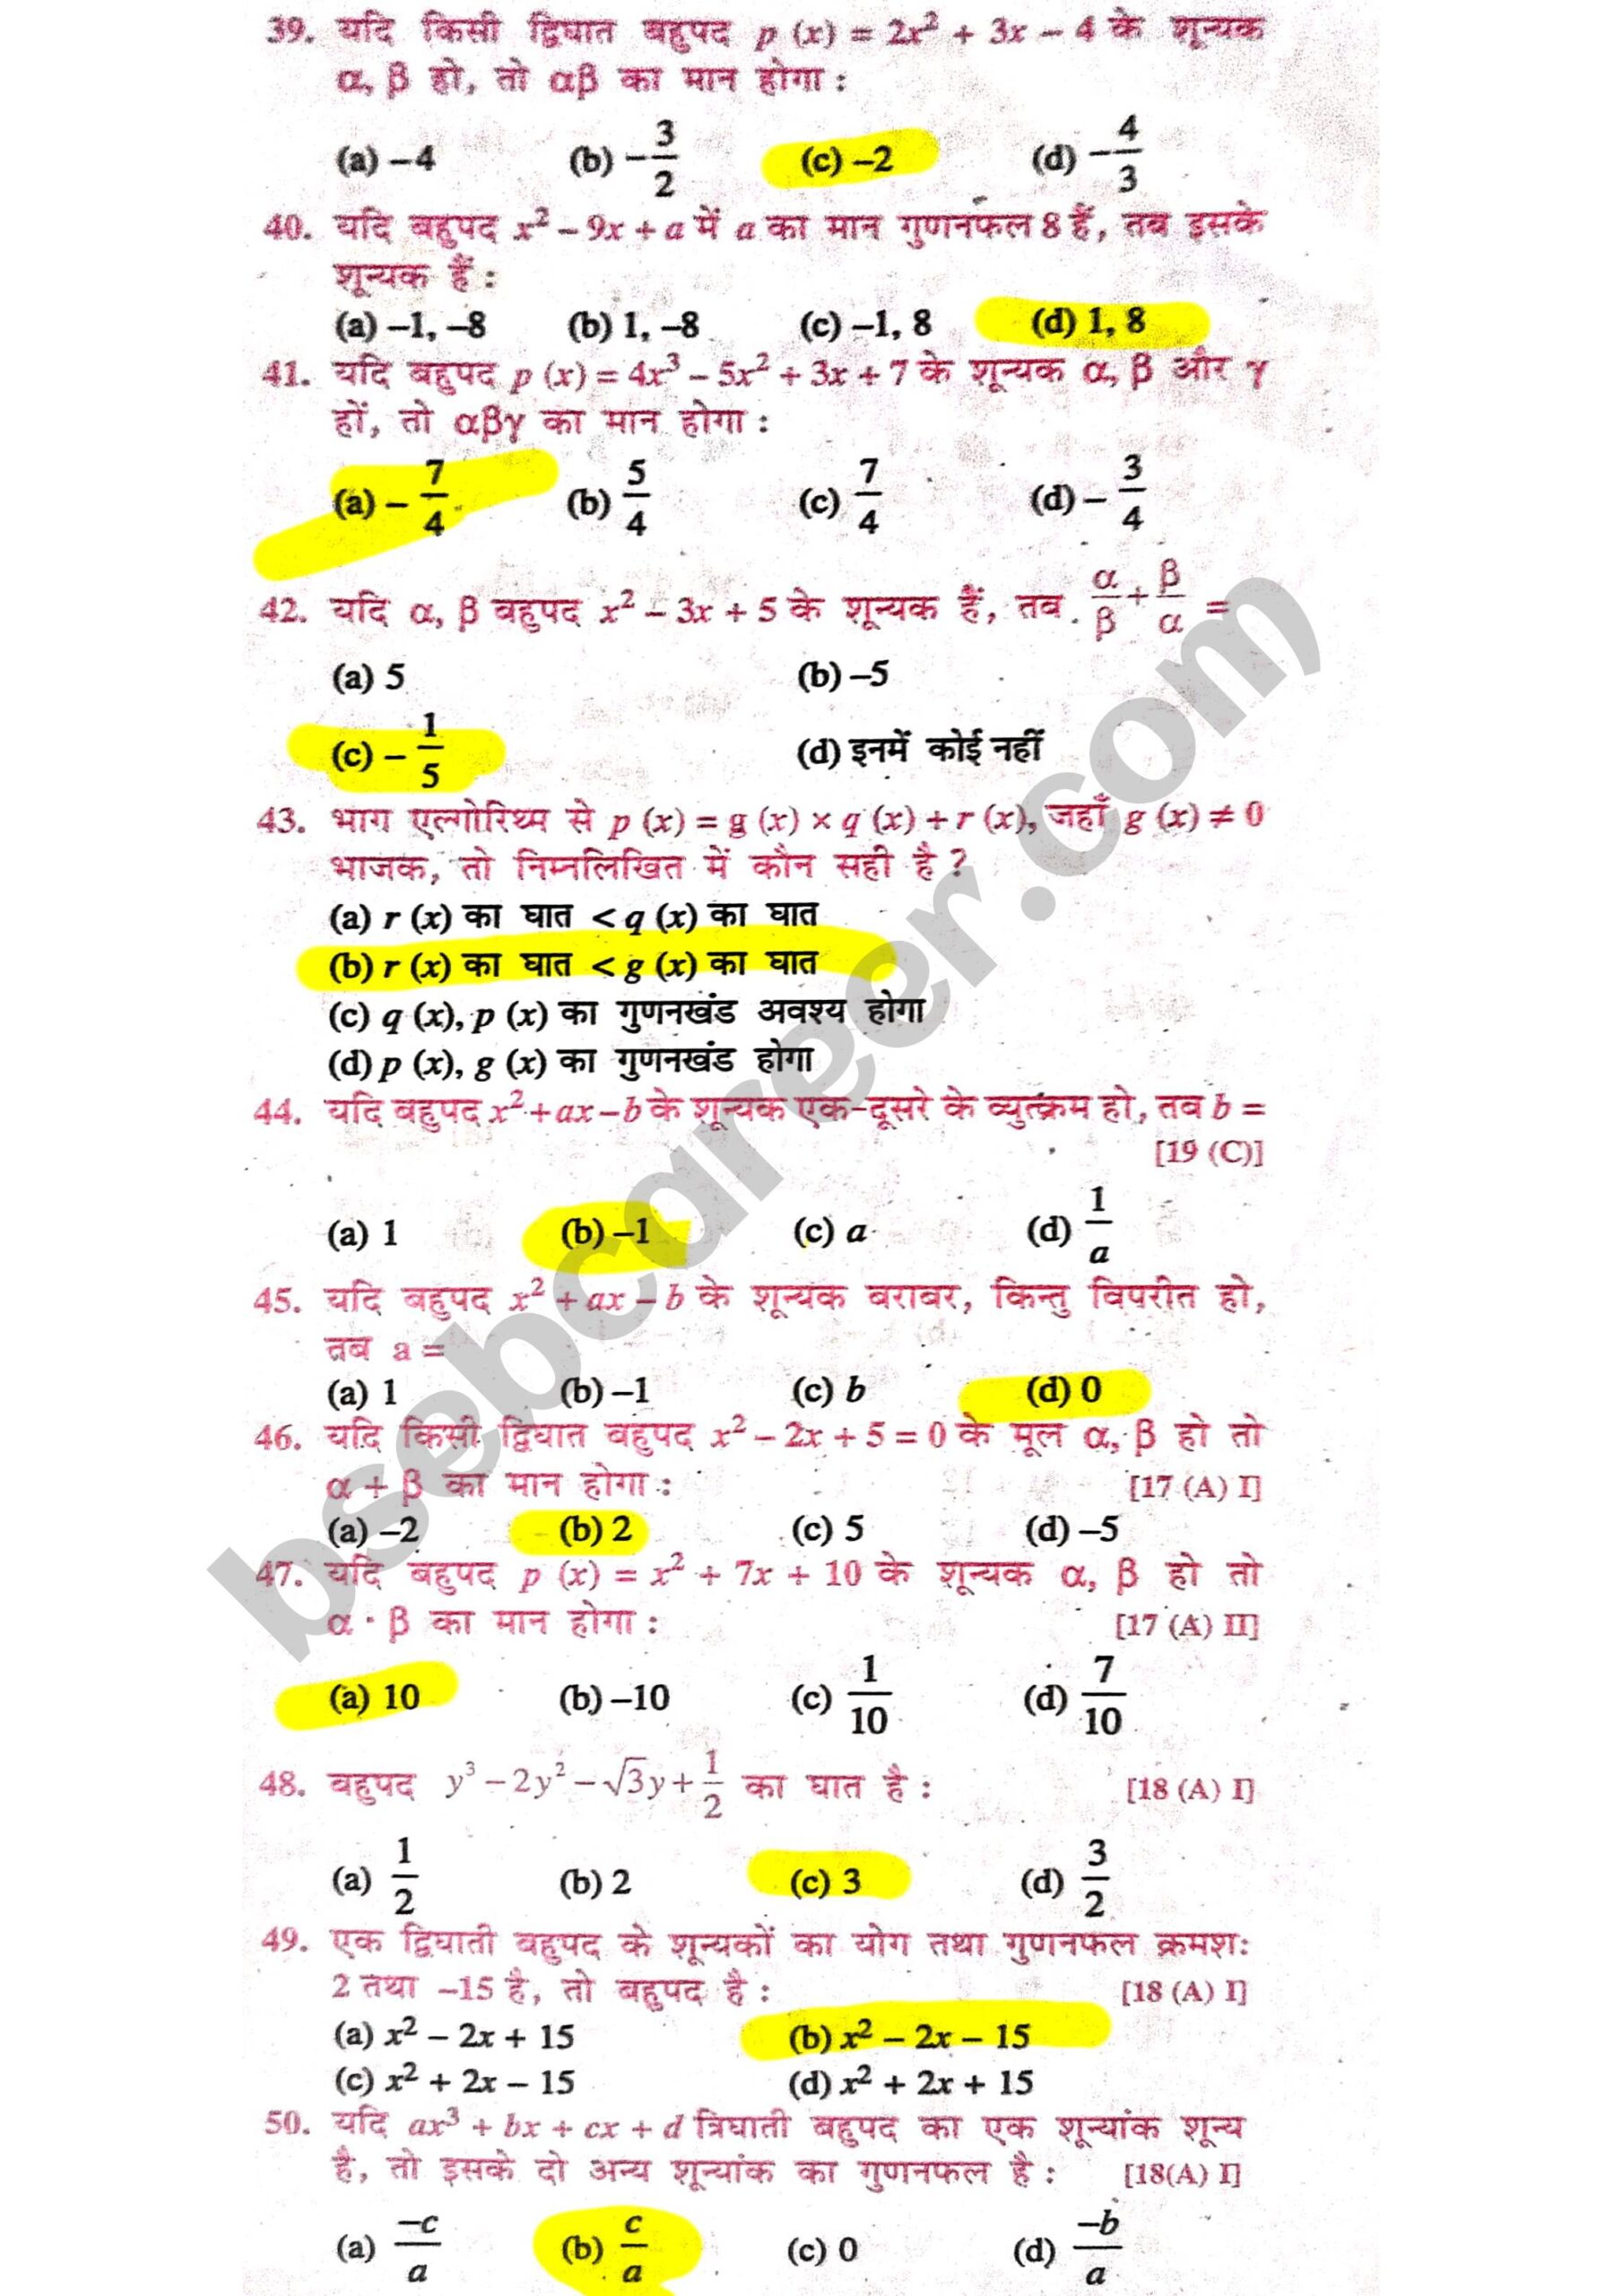 Class 10 Maths Chapter 2 Solutions Pdf Download